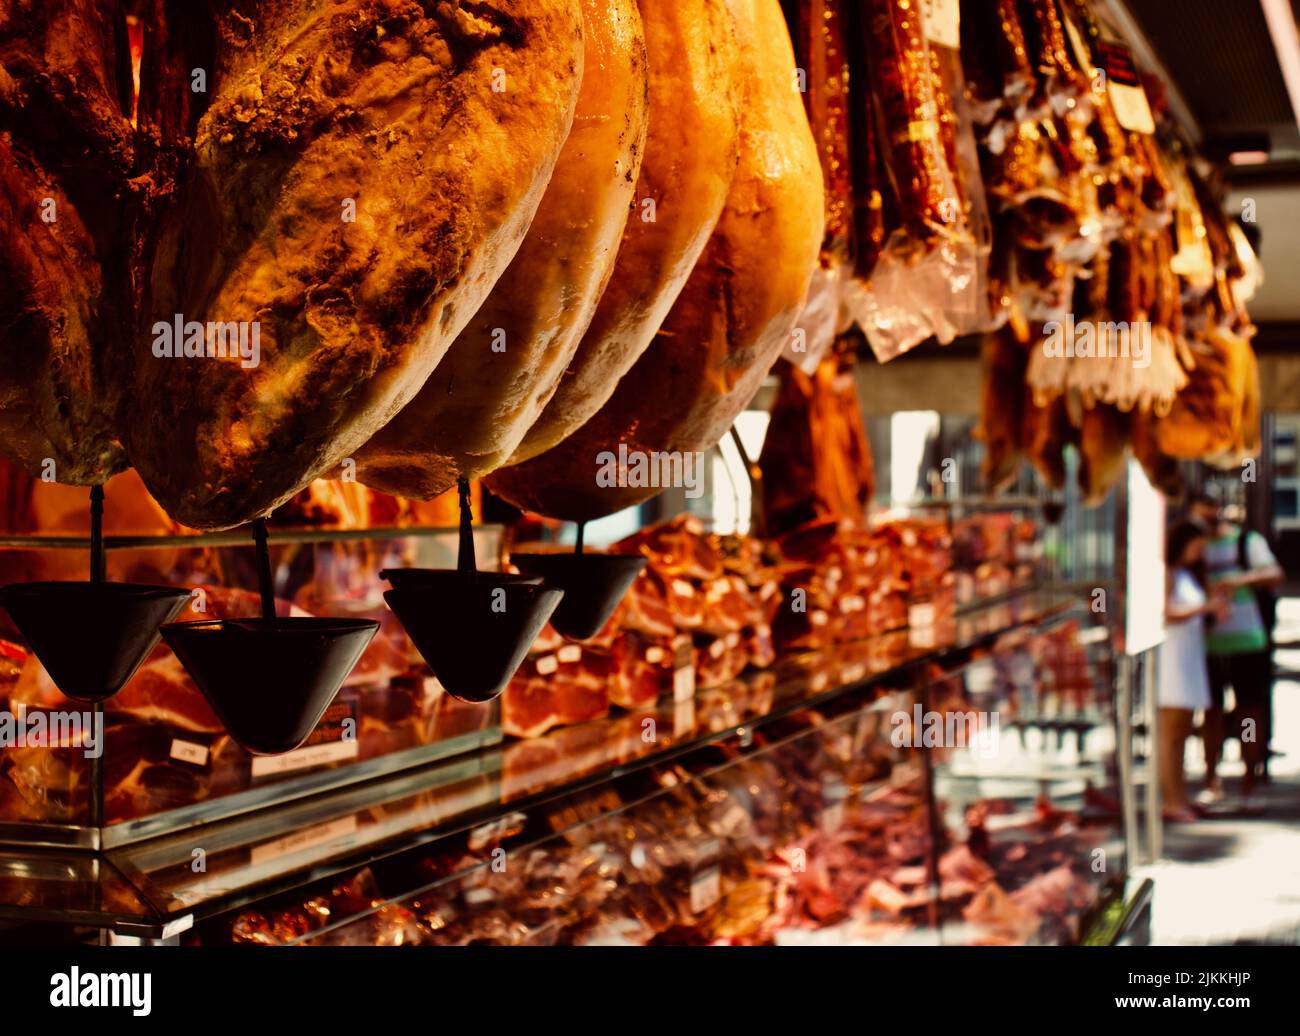 A refrigerated display case of a butcher shop Stock Photo